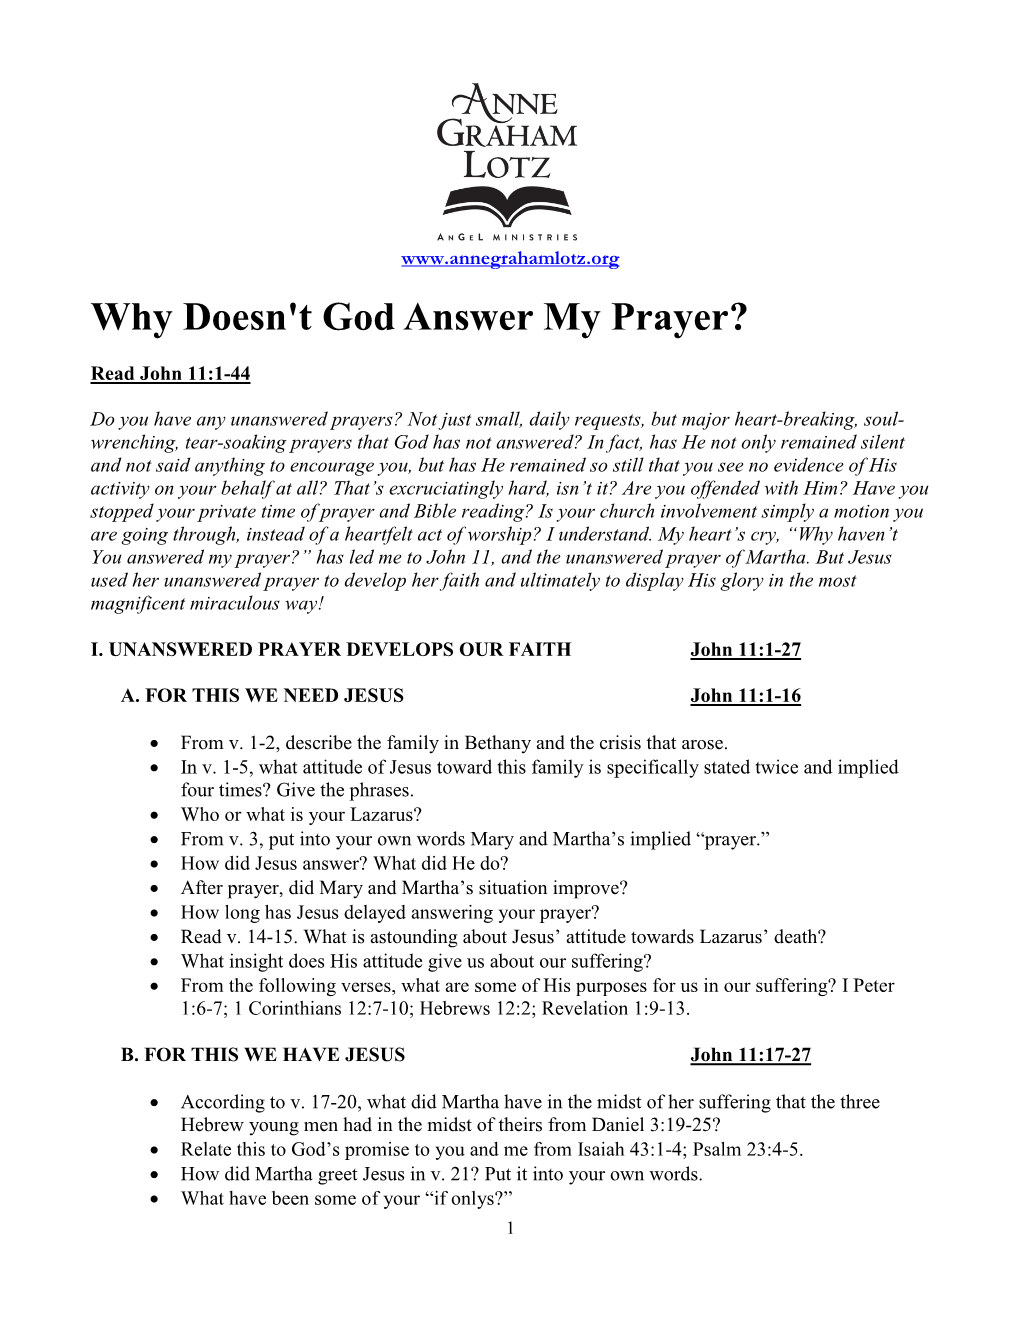 Why Doesn't God Answer My Prayer?